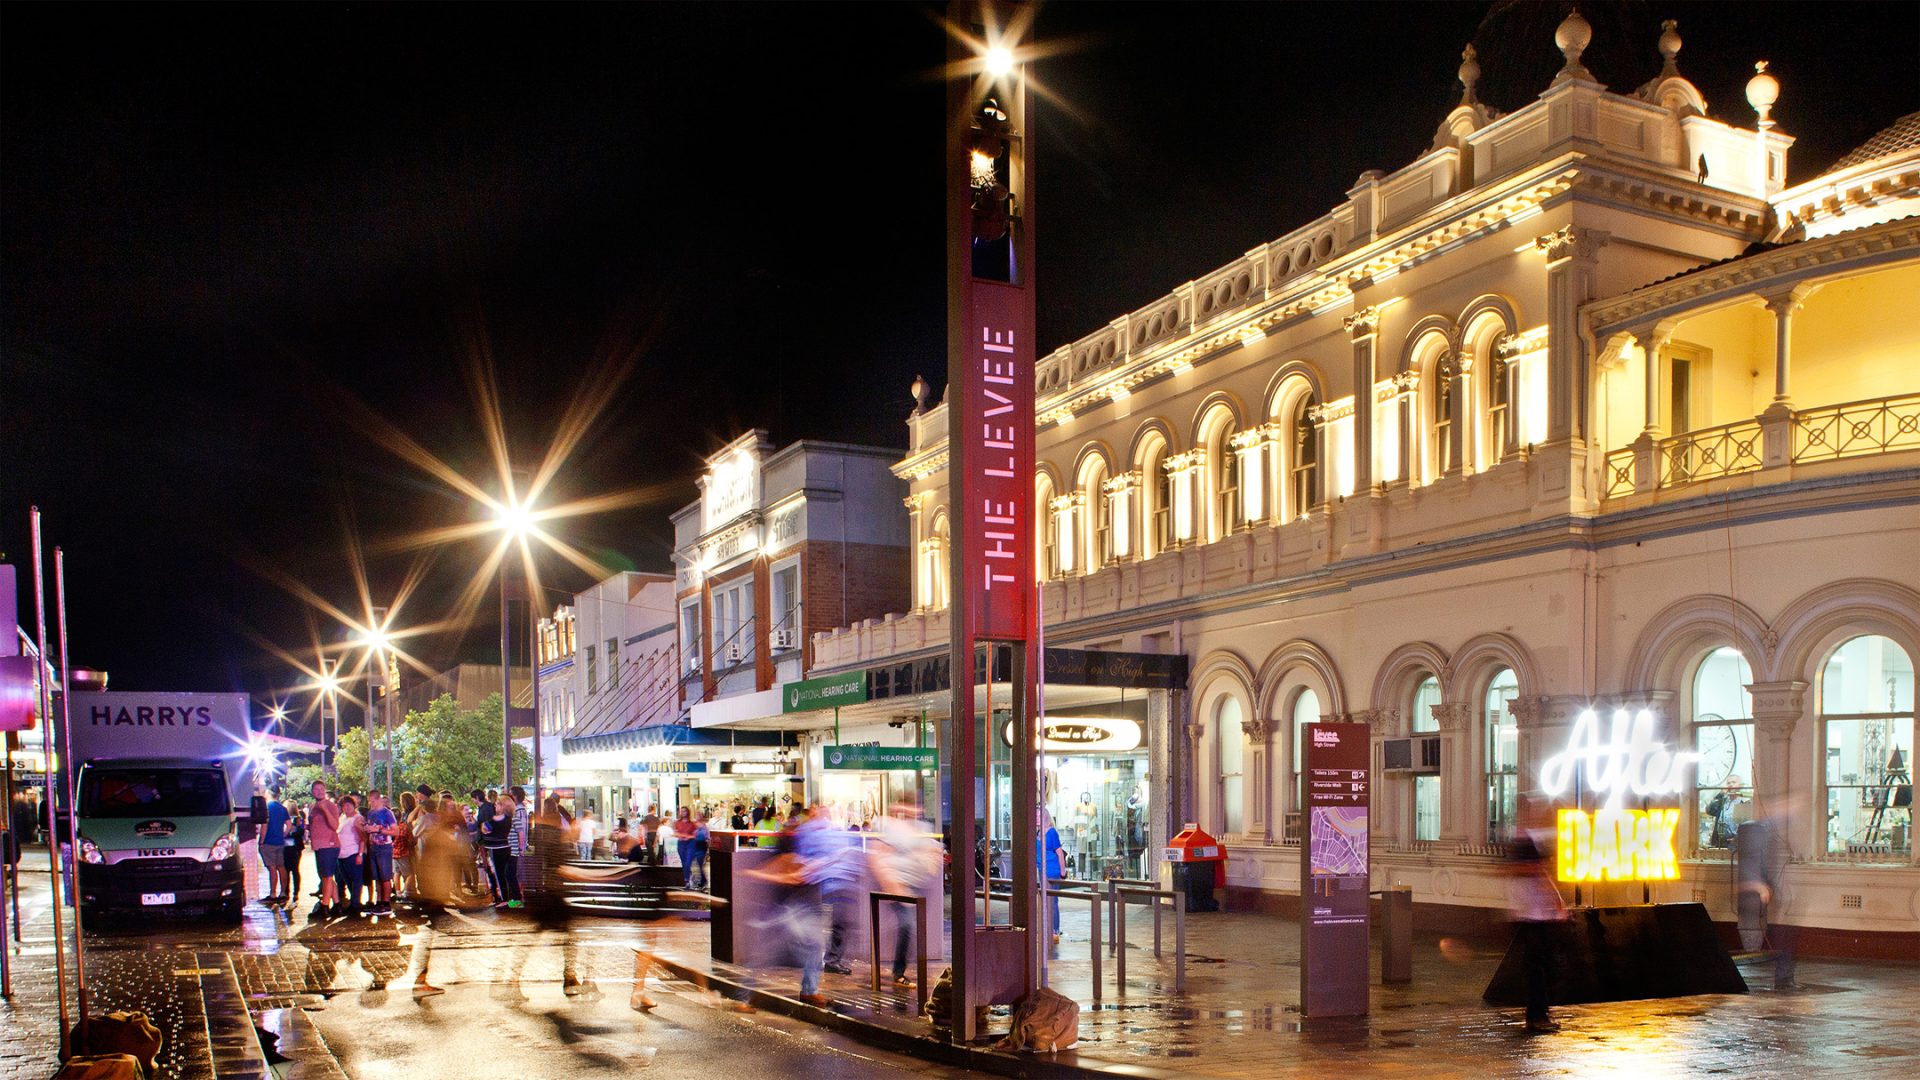 A lively, bustling street scene at night, lined with illuminated buildings and shops. Crowds of people are seen walking and gathering. A prominent building on the right, reminiscent of Maitland's classical architecture, stands tall. Near the center, a lit sign reads "Hello DARKNESS.